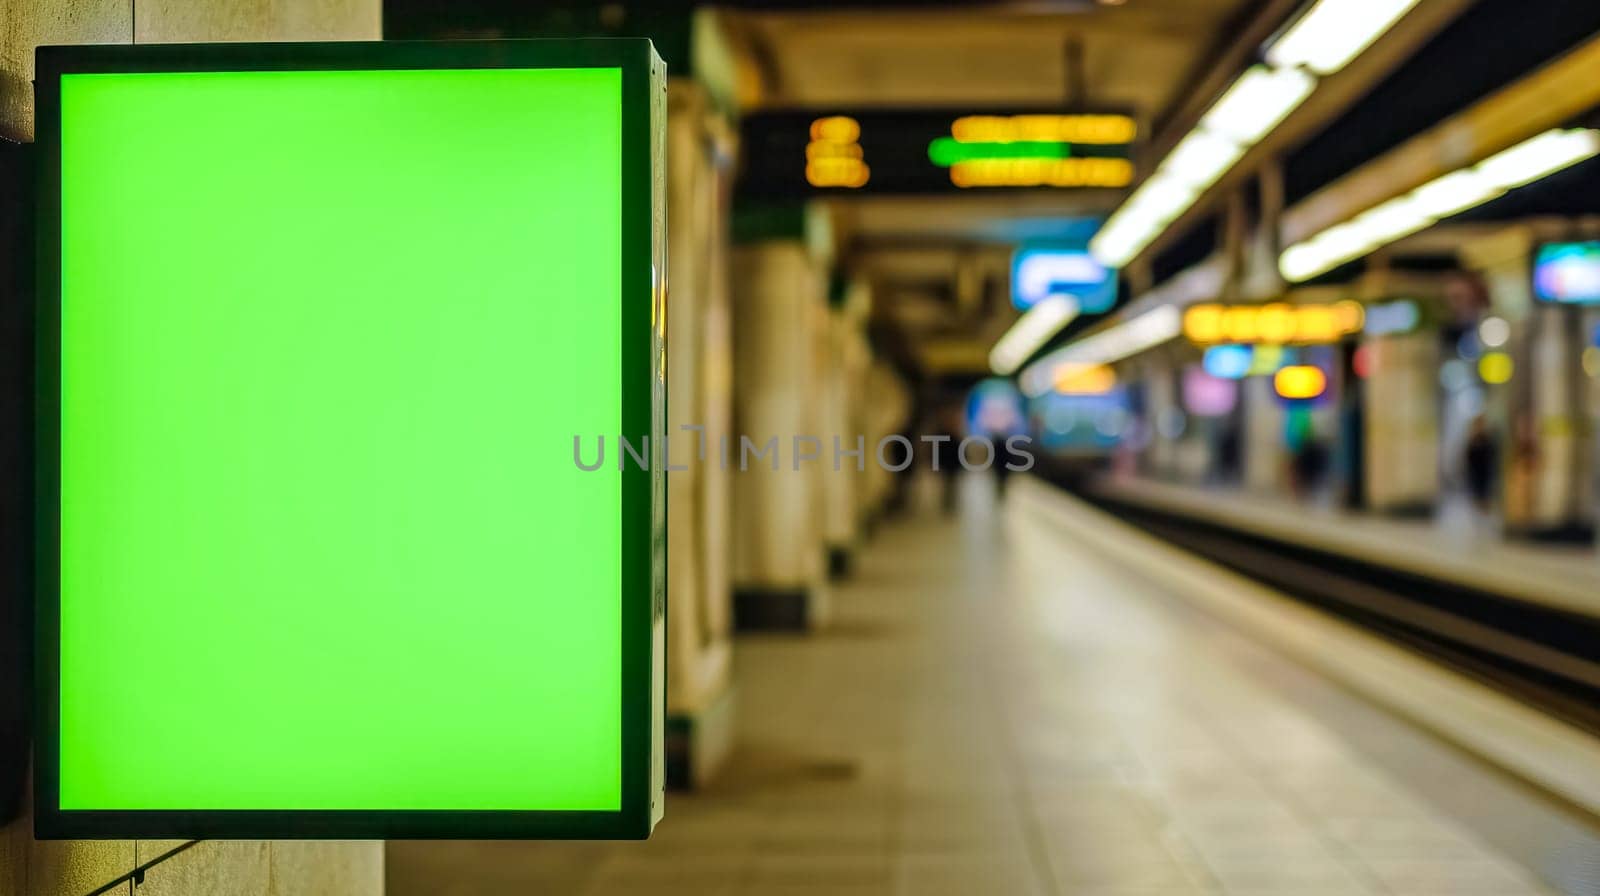 empty green advertising screen in a subway setting with a blurred background showing a metro station platform and an approaching train by Edophoto